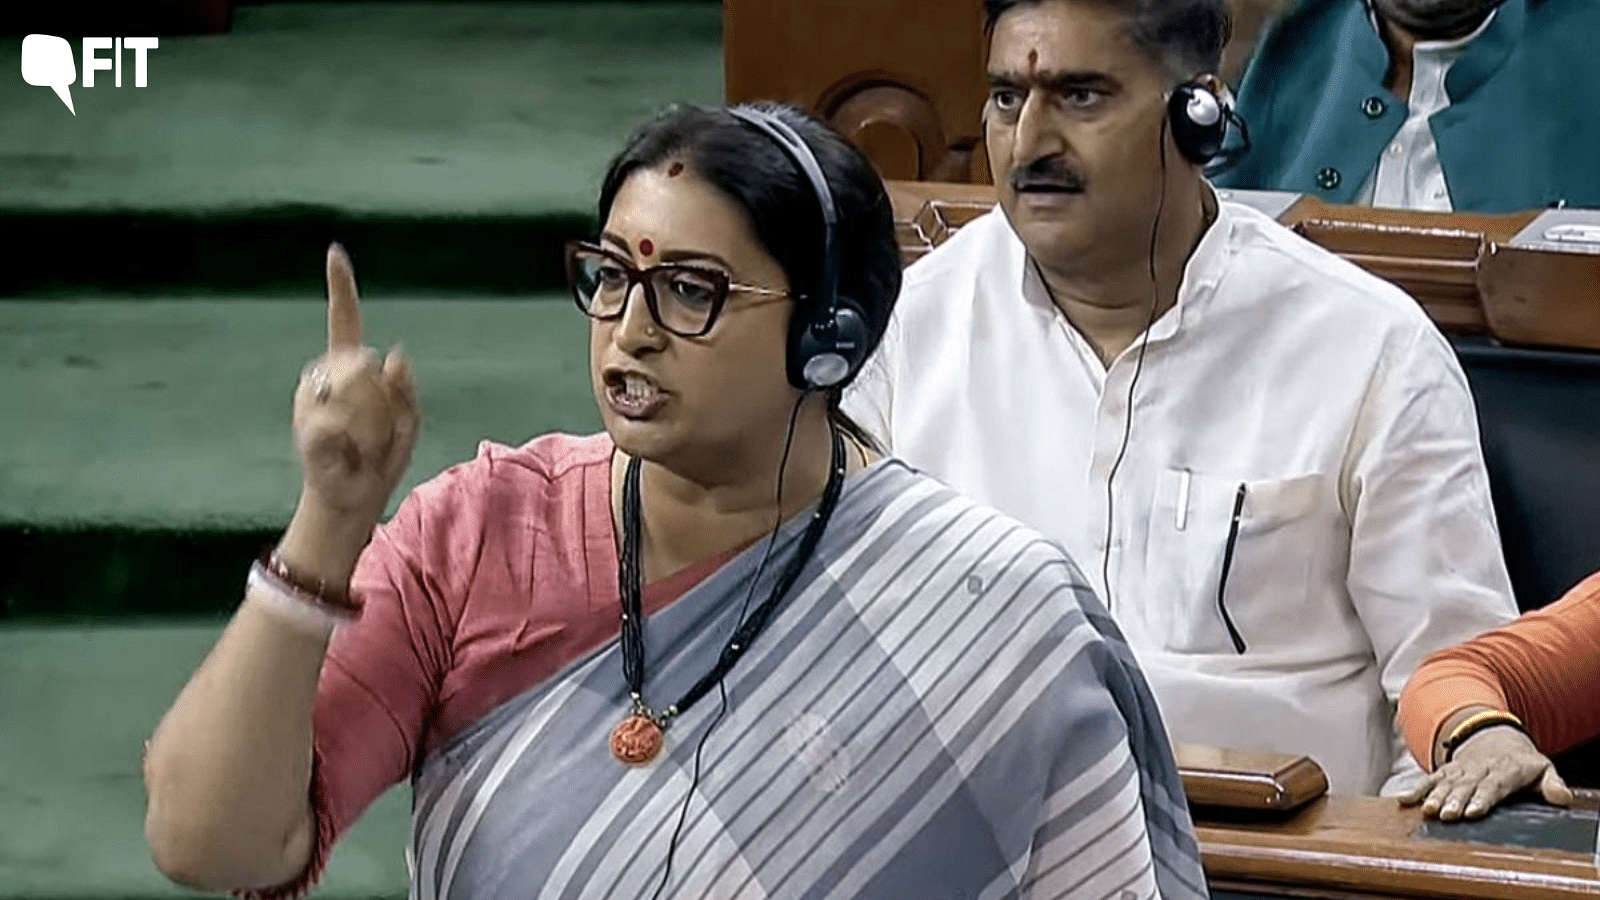 <div class="paragraphs"><p>The BJP MP said that period leaves would deny "equal opportunity" to women seeking economic avenues for themselves.</p></div>